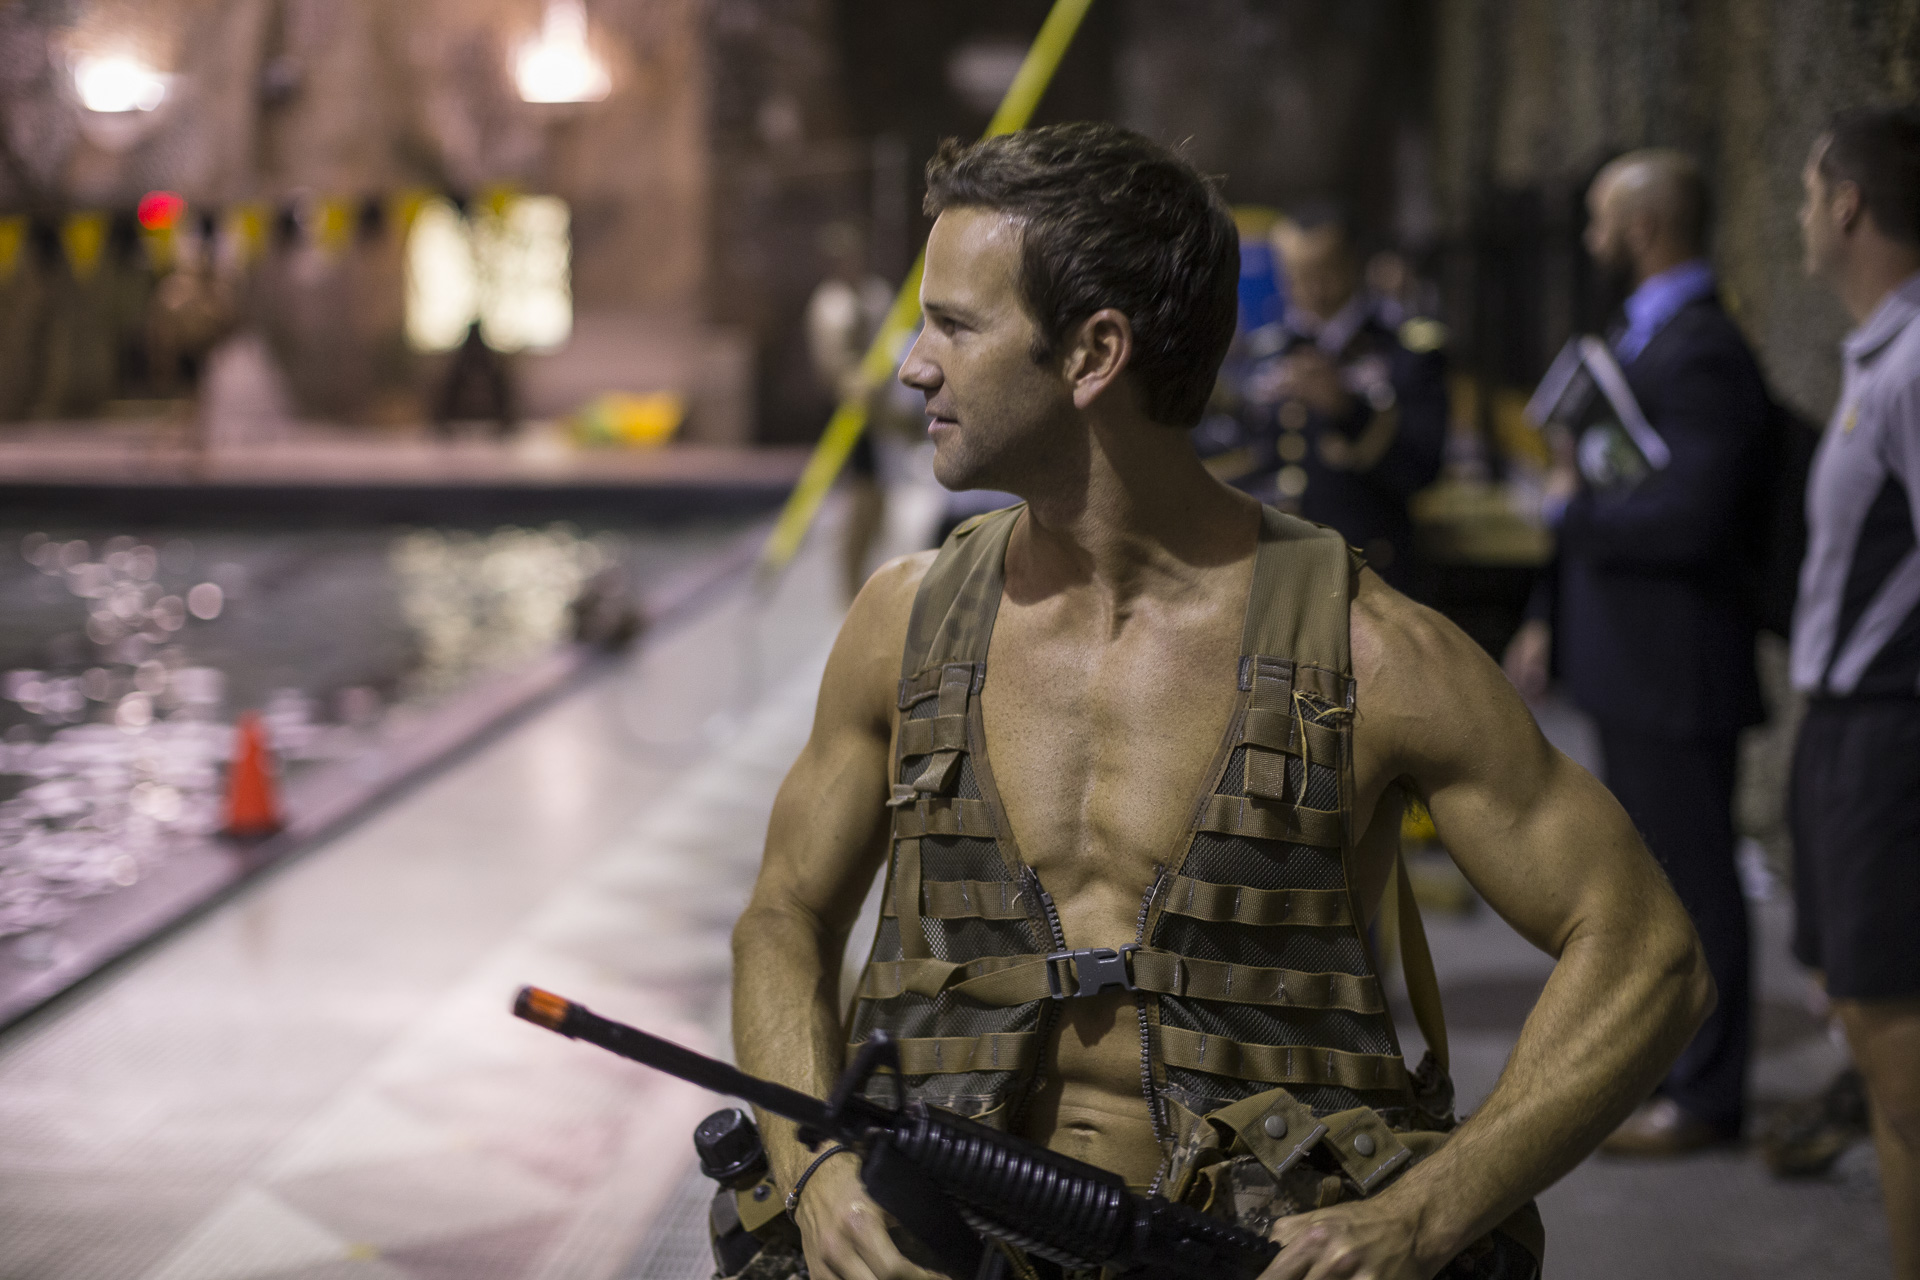 Former Illinois Rep. Aaron Schock at West Point, Oct. 1.